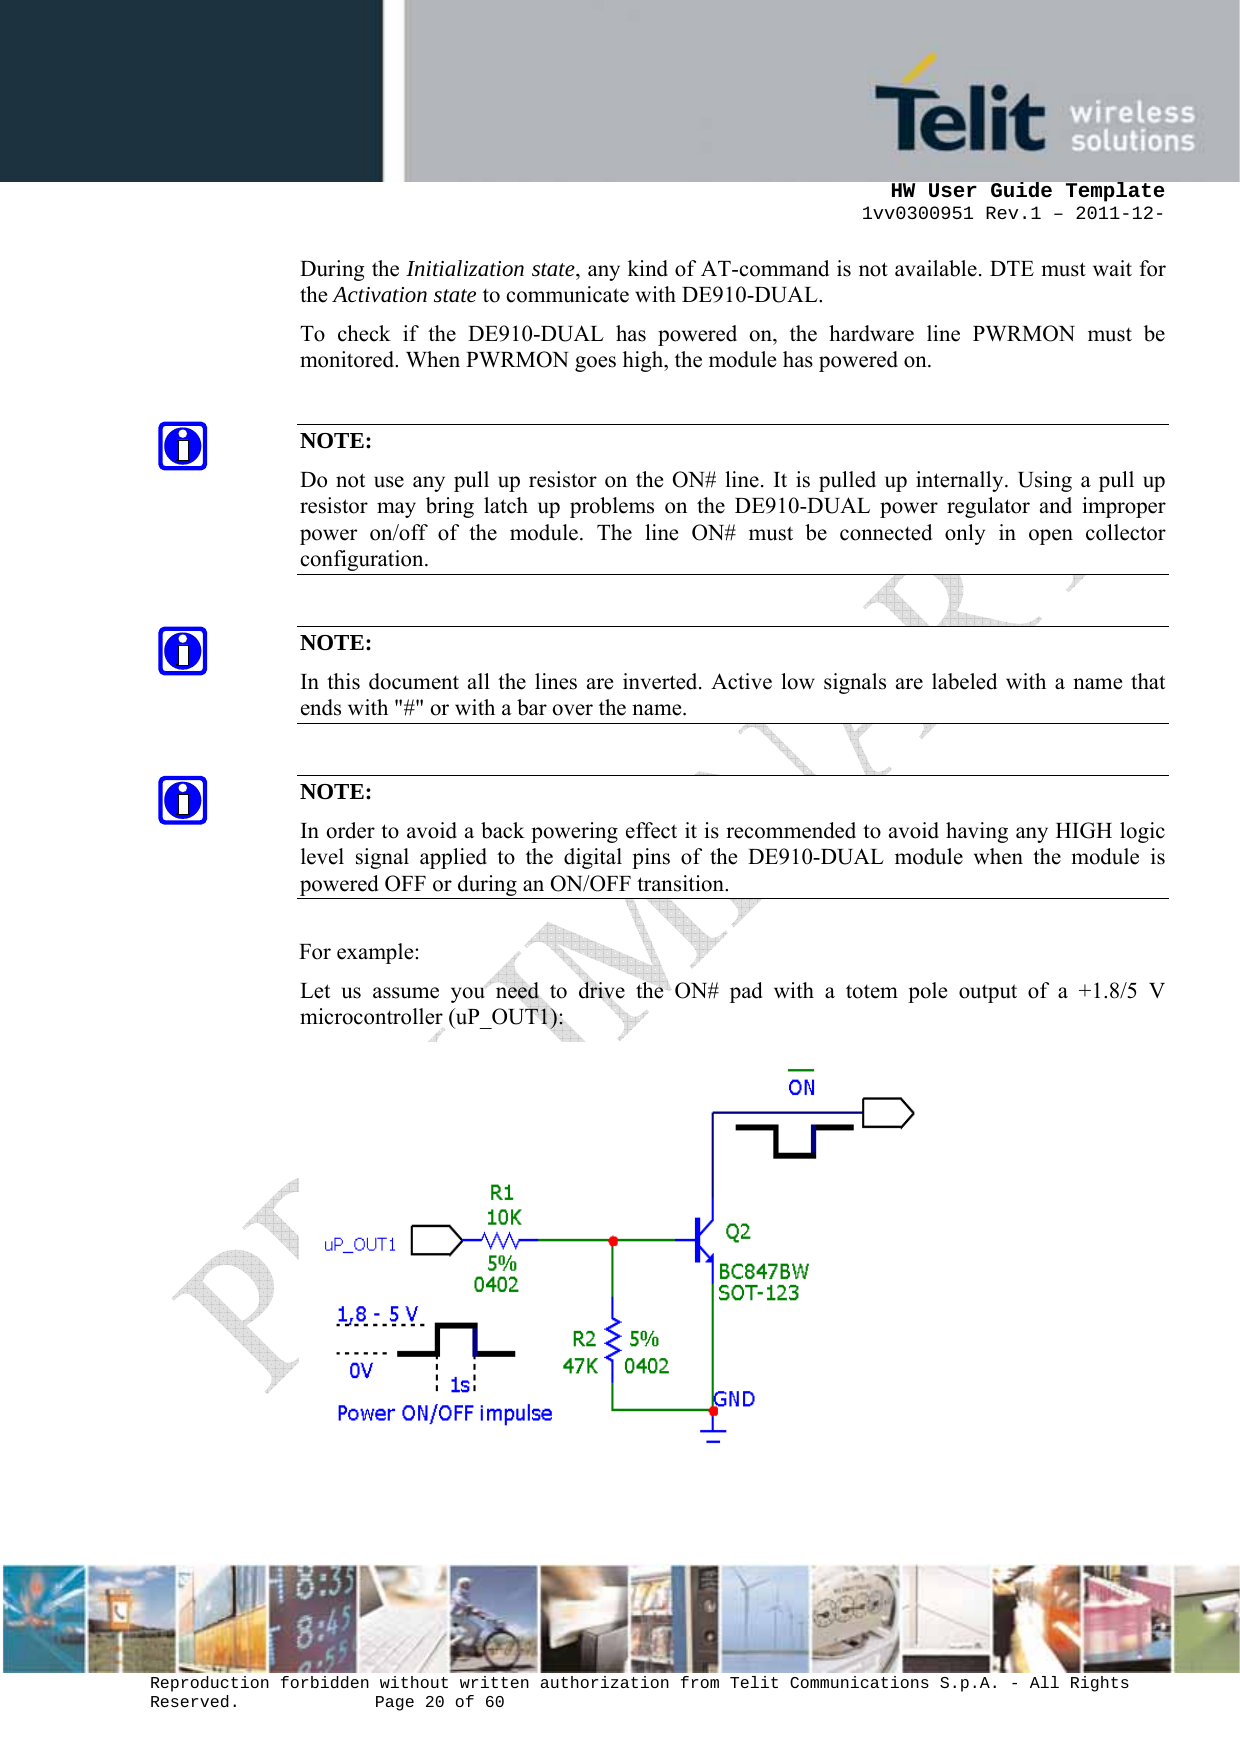      HW User Guide Template 1vv0300951 Rev.1 – 2011-12-  Reproduction forbidden without written authorization from Telit Communications S.p.A. - All Rights Reserved.    Page 20 of 60                                                     During the Initialization state, any kind of AT-command is not available. DTE must wait for the Activation state to communicate with DE910-DUAL. To check if the DE910-DUAL has powered on, the hardware line PWRMON must be monitored. When PWRMON goes high, the module has powered on.  NOTE: Do not use any pull up resistor on the ON# line. It is pulled up internally. Using a pull up resistor may bring latch up problems on the DE910-DUAL power regulator and improper power on/off of the module. The line ON# must be connected only in open collector configuration.  NOTE: In this document all the lines are inverted. Active low signals are labeled with a name that ends with &quot;#&quot; or with a bar over the name.  NOTE: In order to avoid a back powering effect it is recommended to avoid having any HIGH logic level signal applied to the digital pins of the DE910-DUAL module when the module is powered OFF or during an ON/OFF transition.  For example: Let us assume you need to drive the ON# pad with a totem pole output of a +1.8/5 V microcontroller (uP_OUT1):   